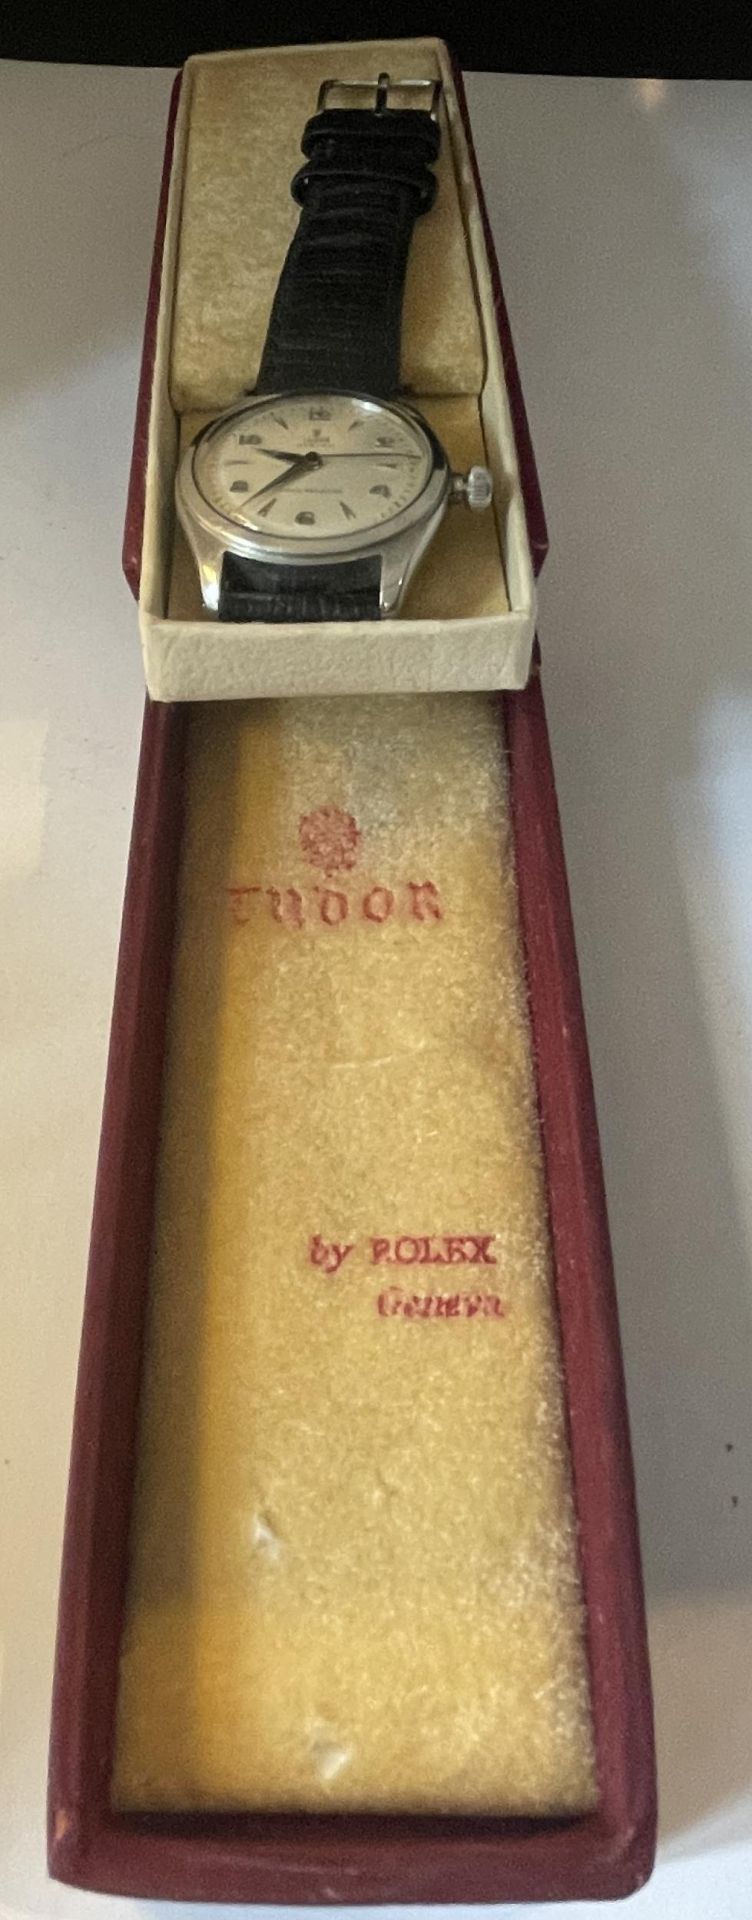 A GENTS TUDOR ROLEX OYSTER WRIST WATCH IN ORIGINAL BOX SEEN WORKING BUT NO WARRANTY - Image 2 of 5